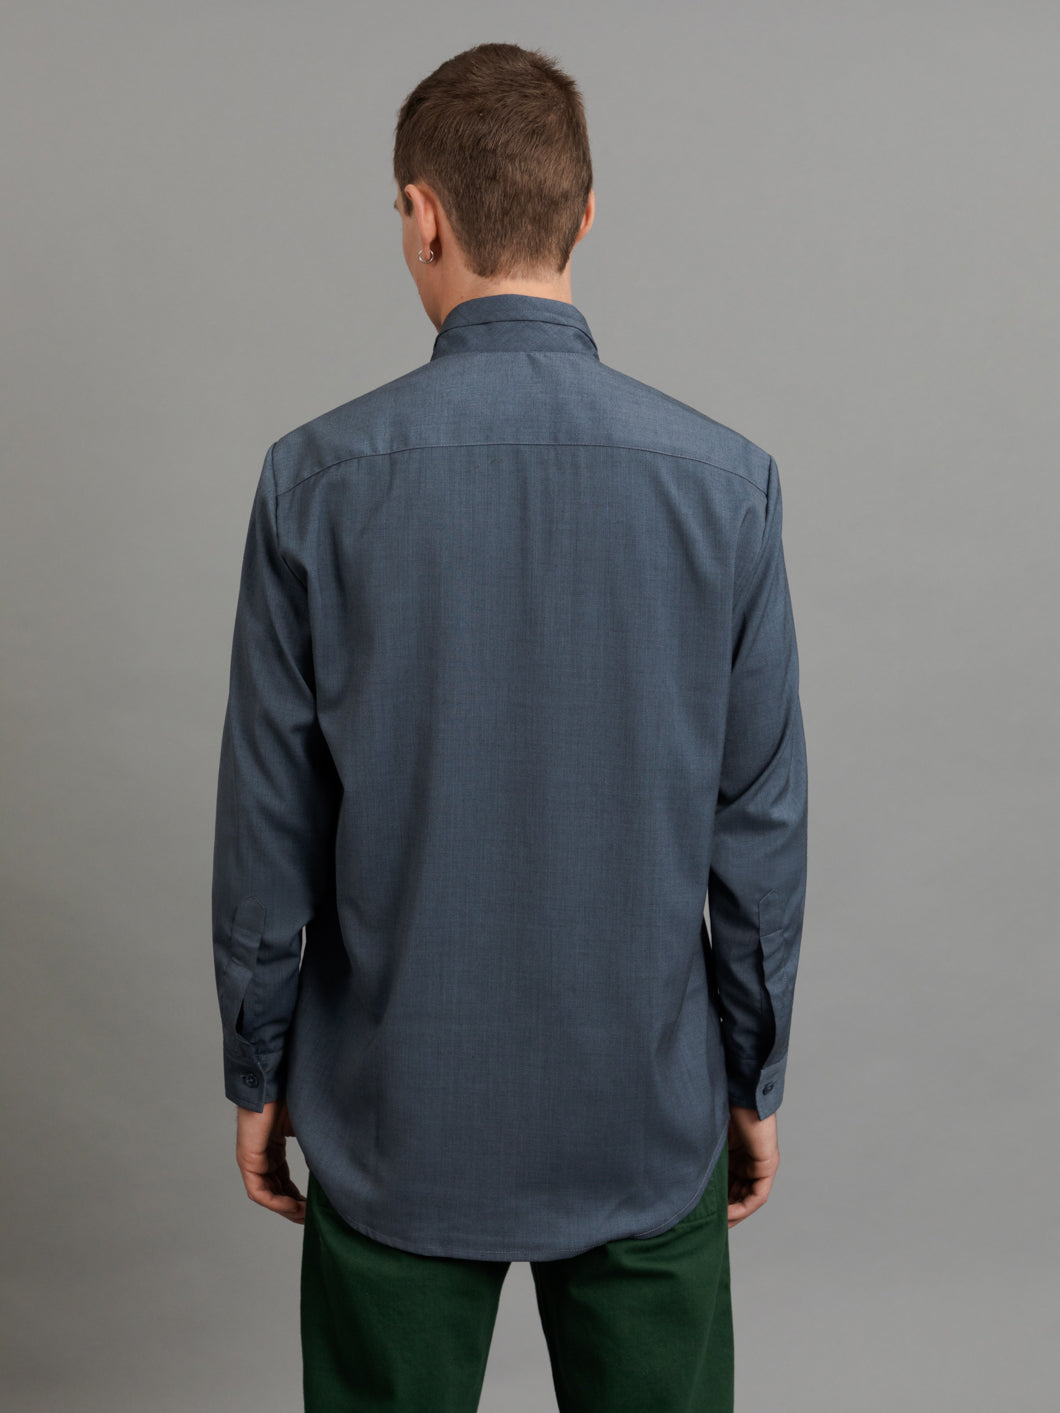 Zipped Double Collar Overshirt in Light Blue Twill